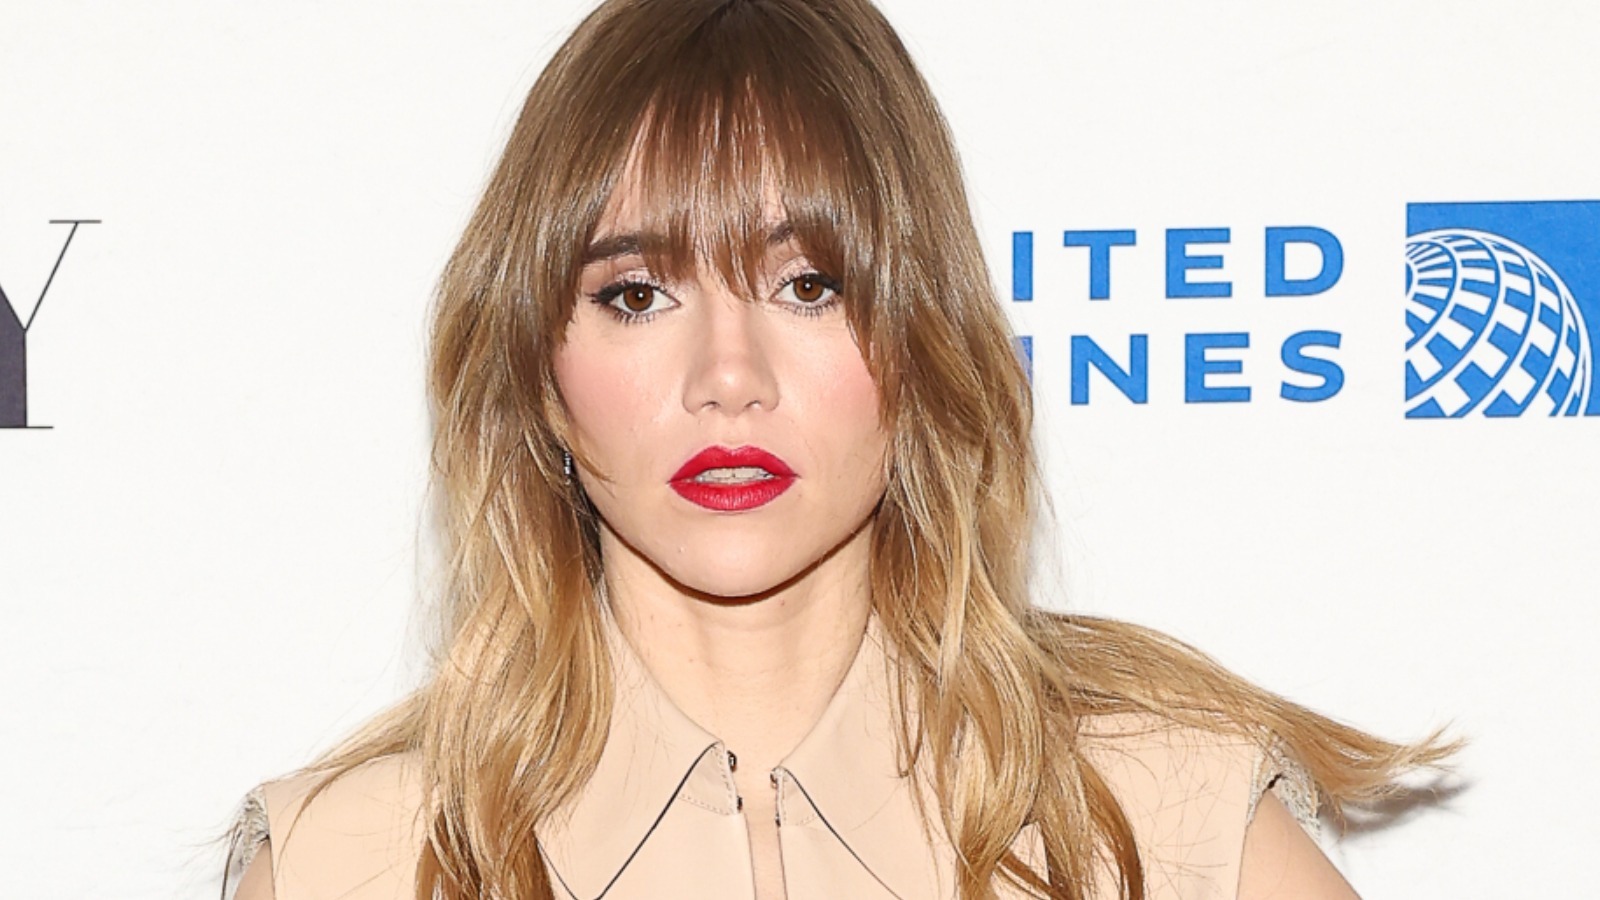 Waterfall Fringe Is The Versatile & Easy Way To Hop On The Bangs Trend – Glam